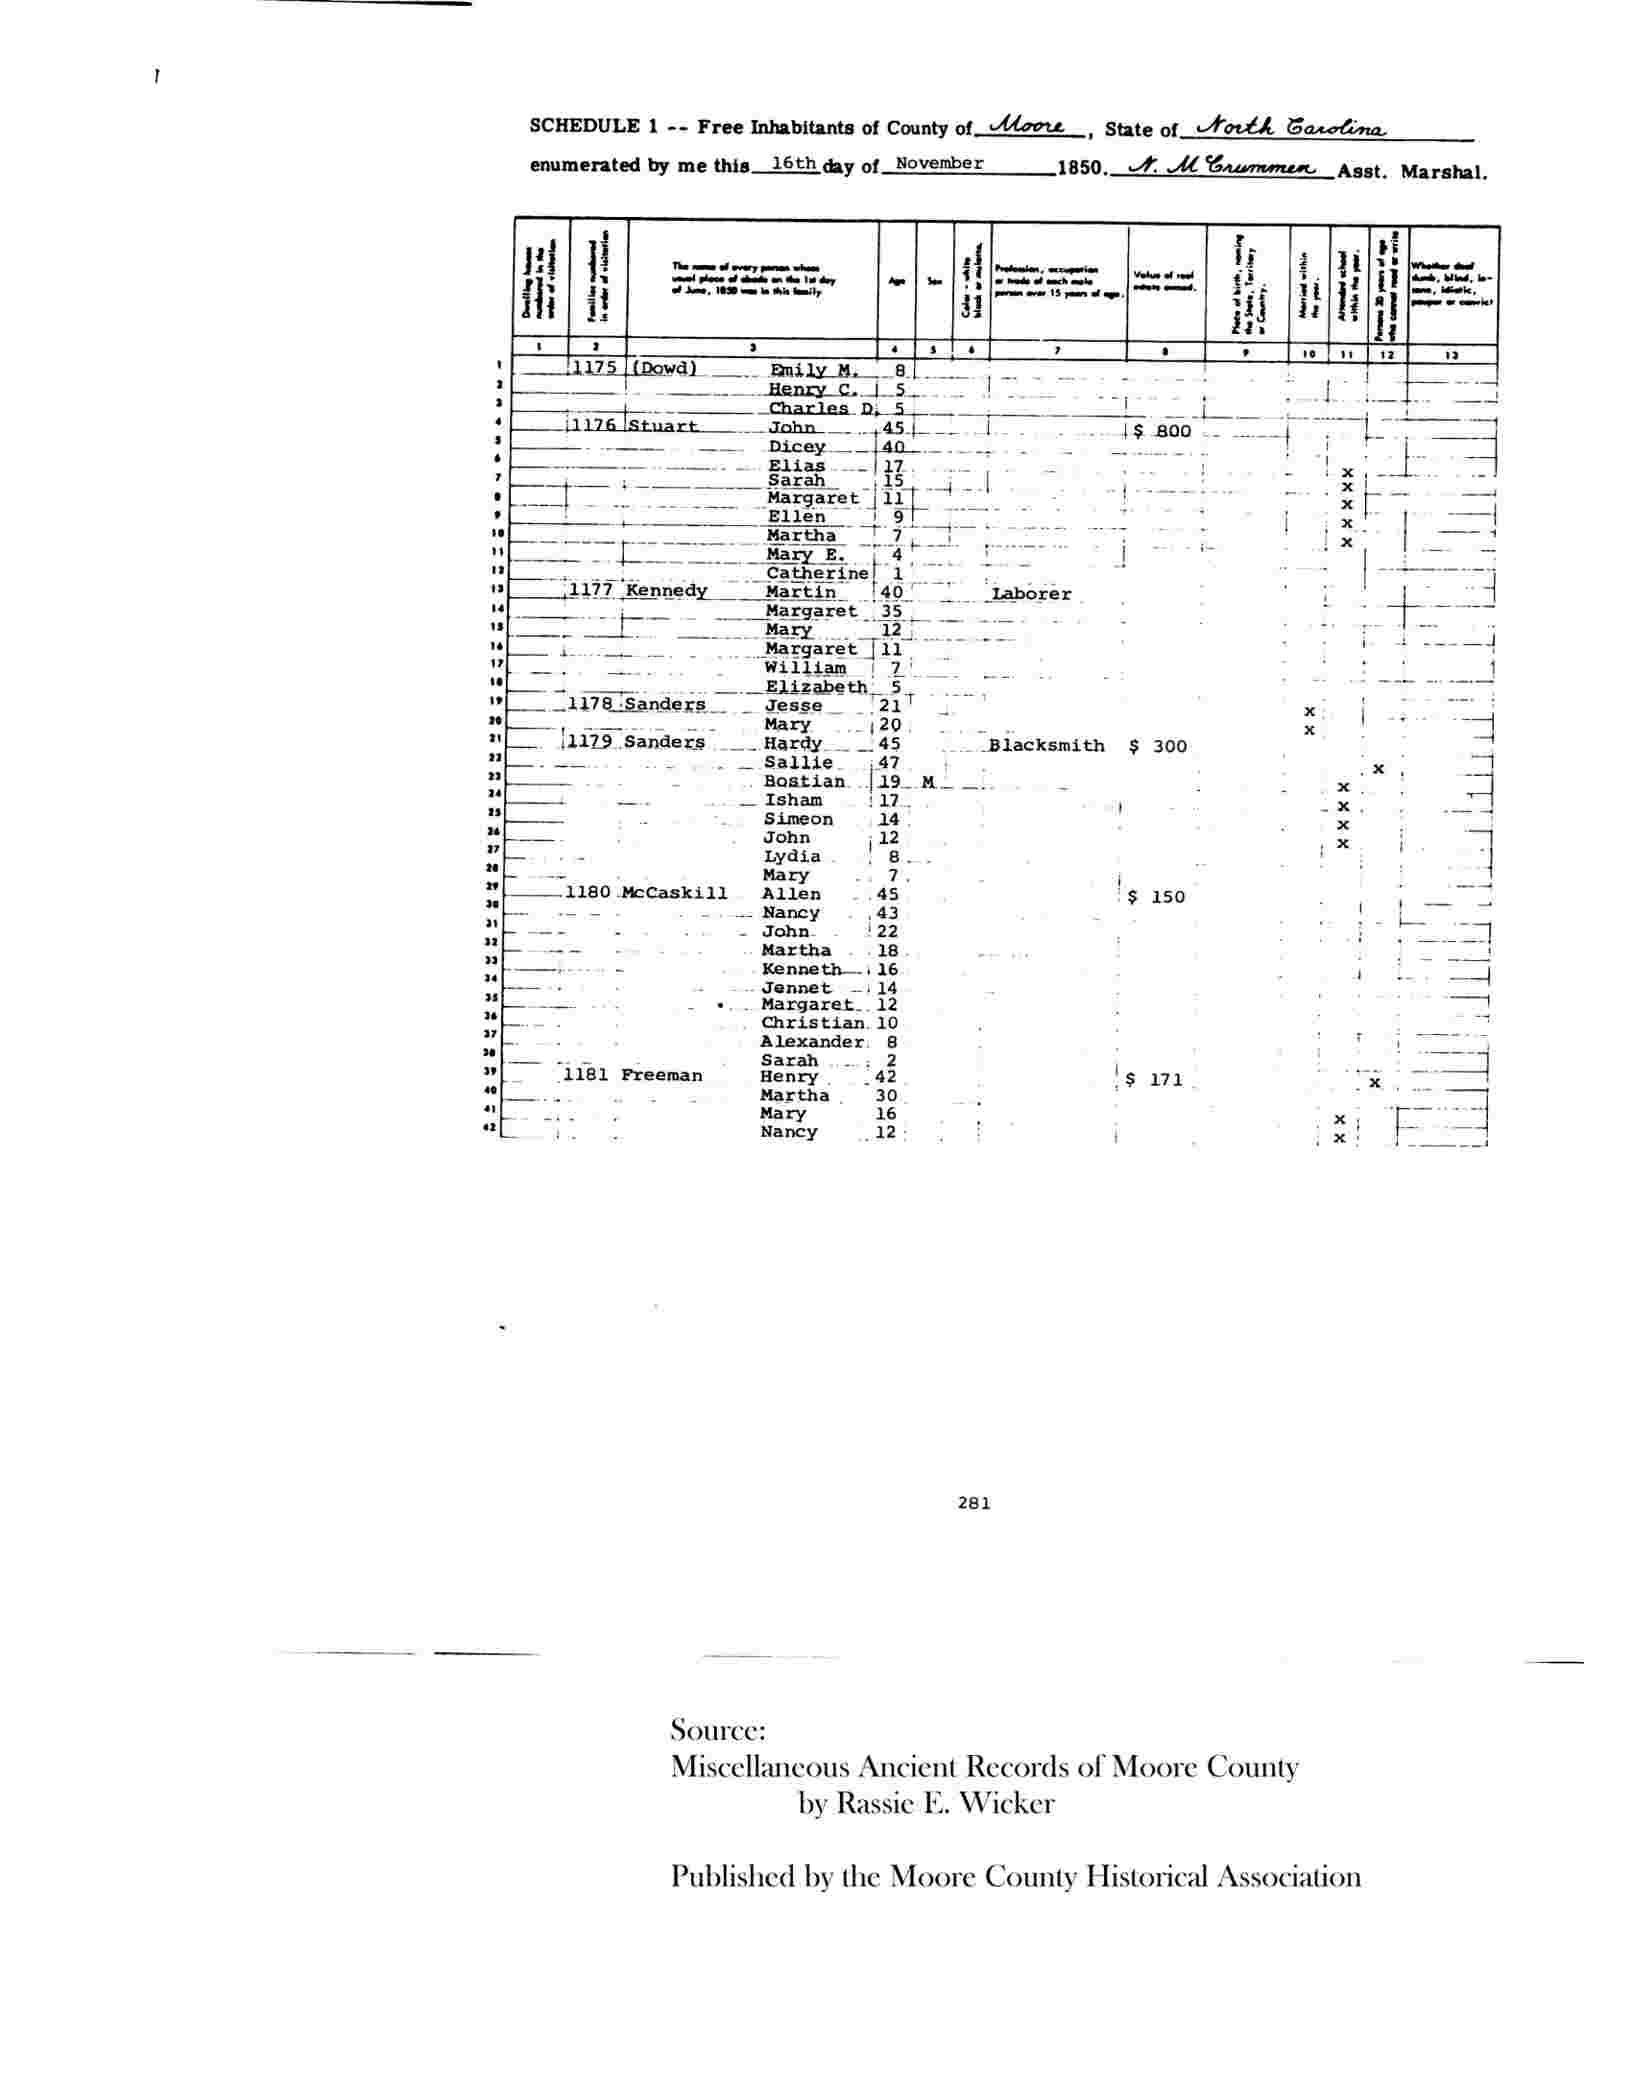 A page from 1850 census